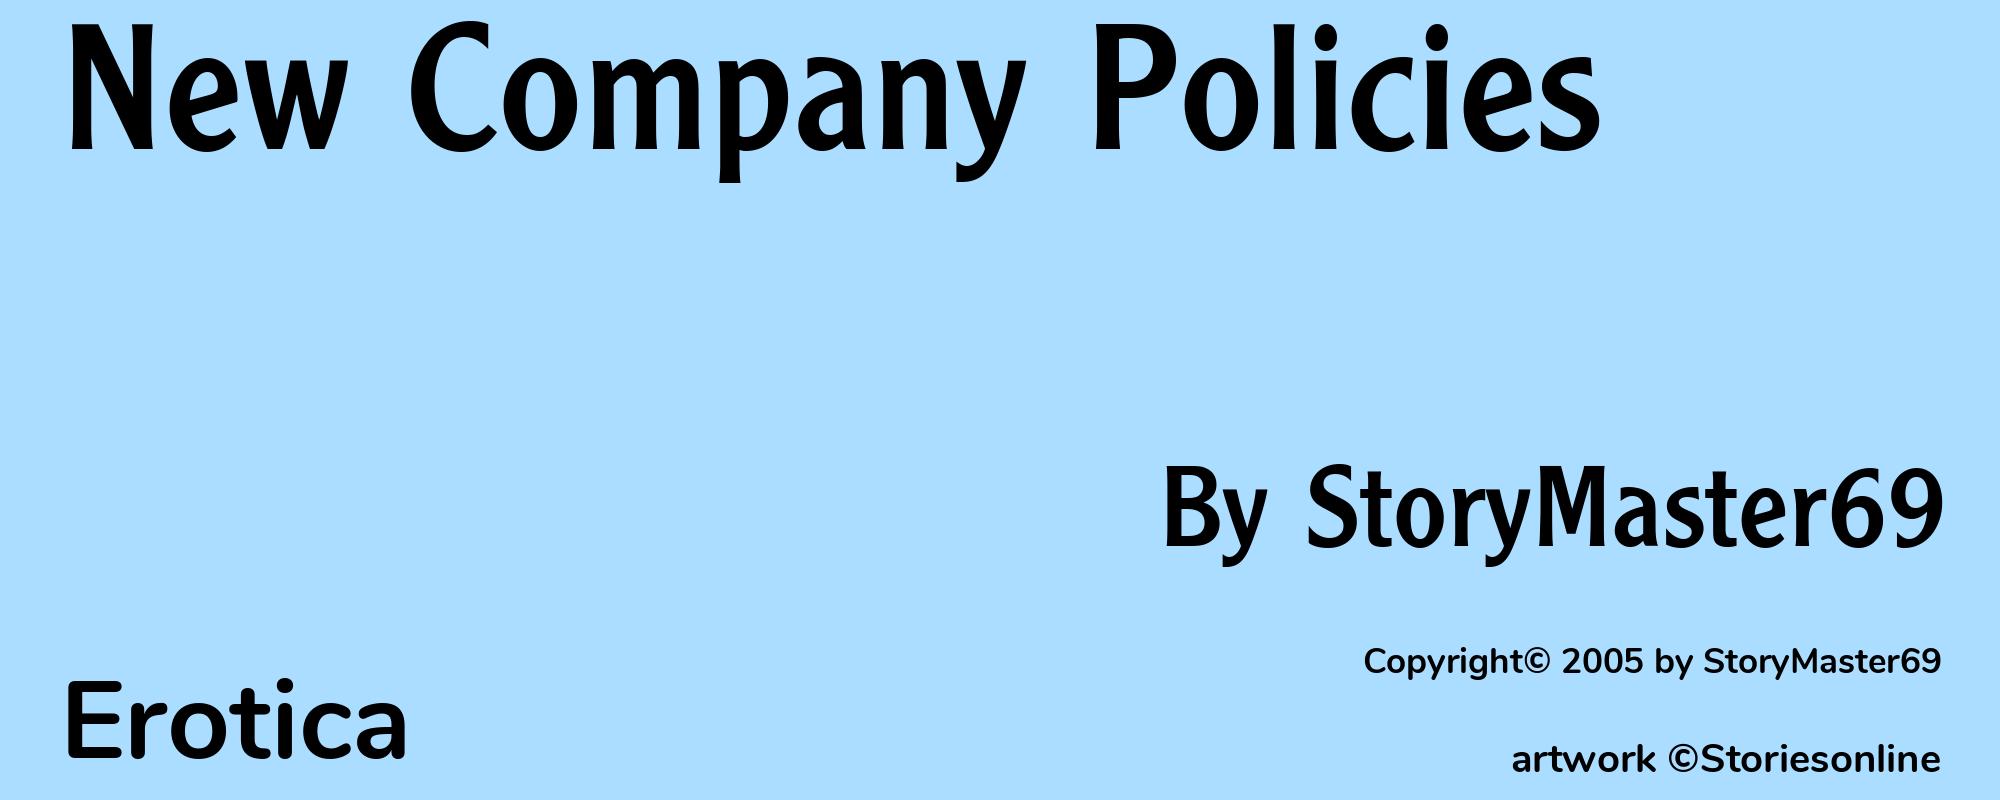 New Company Policies - Cover